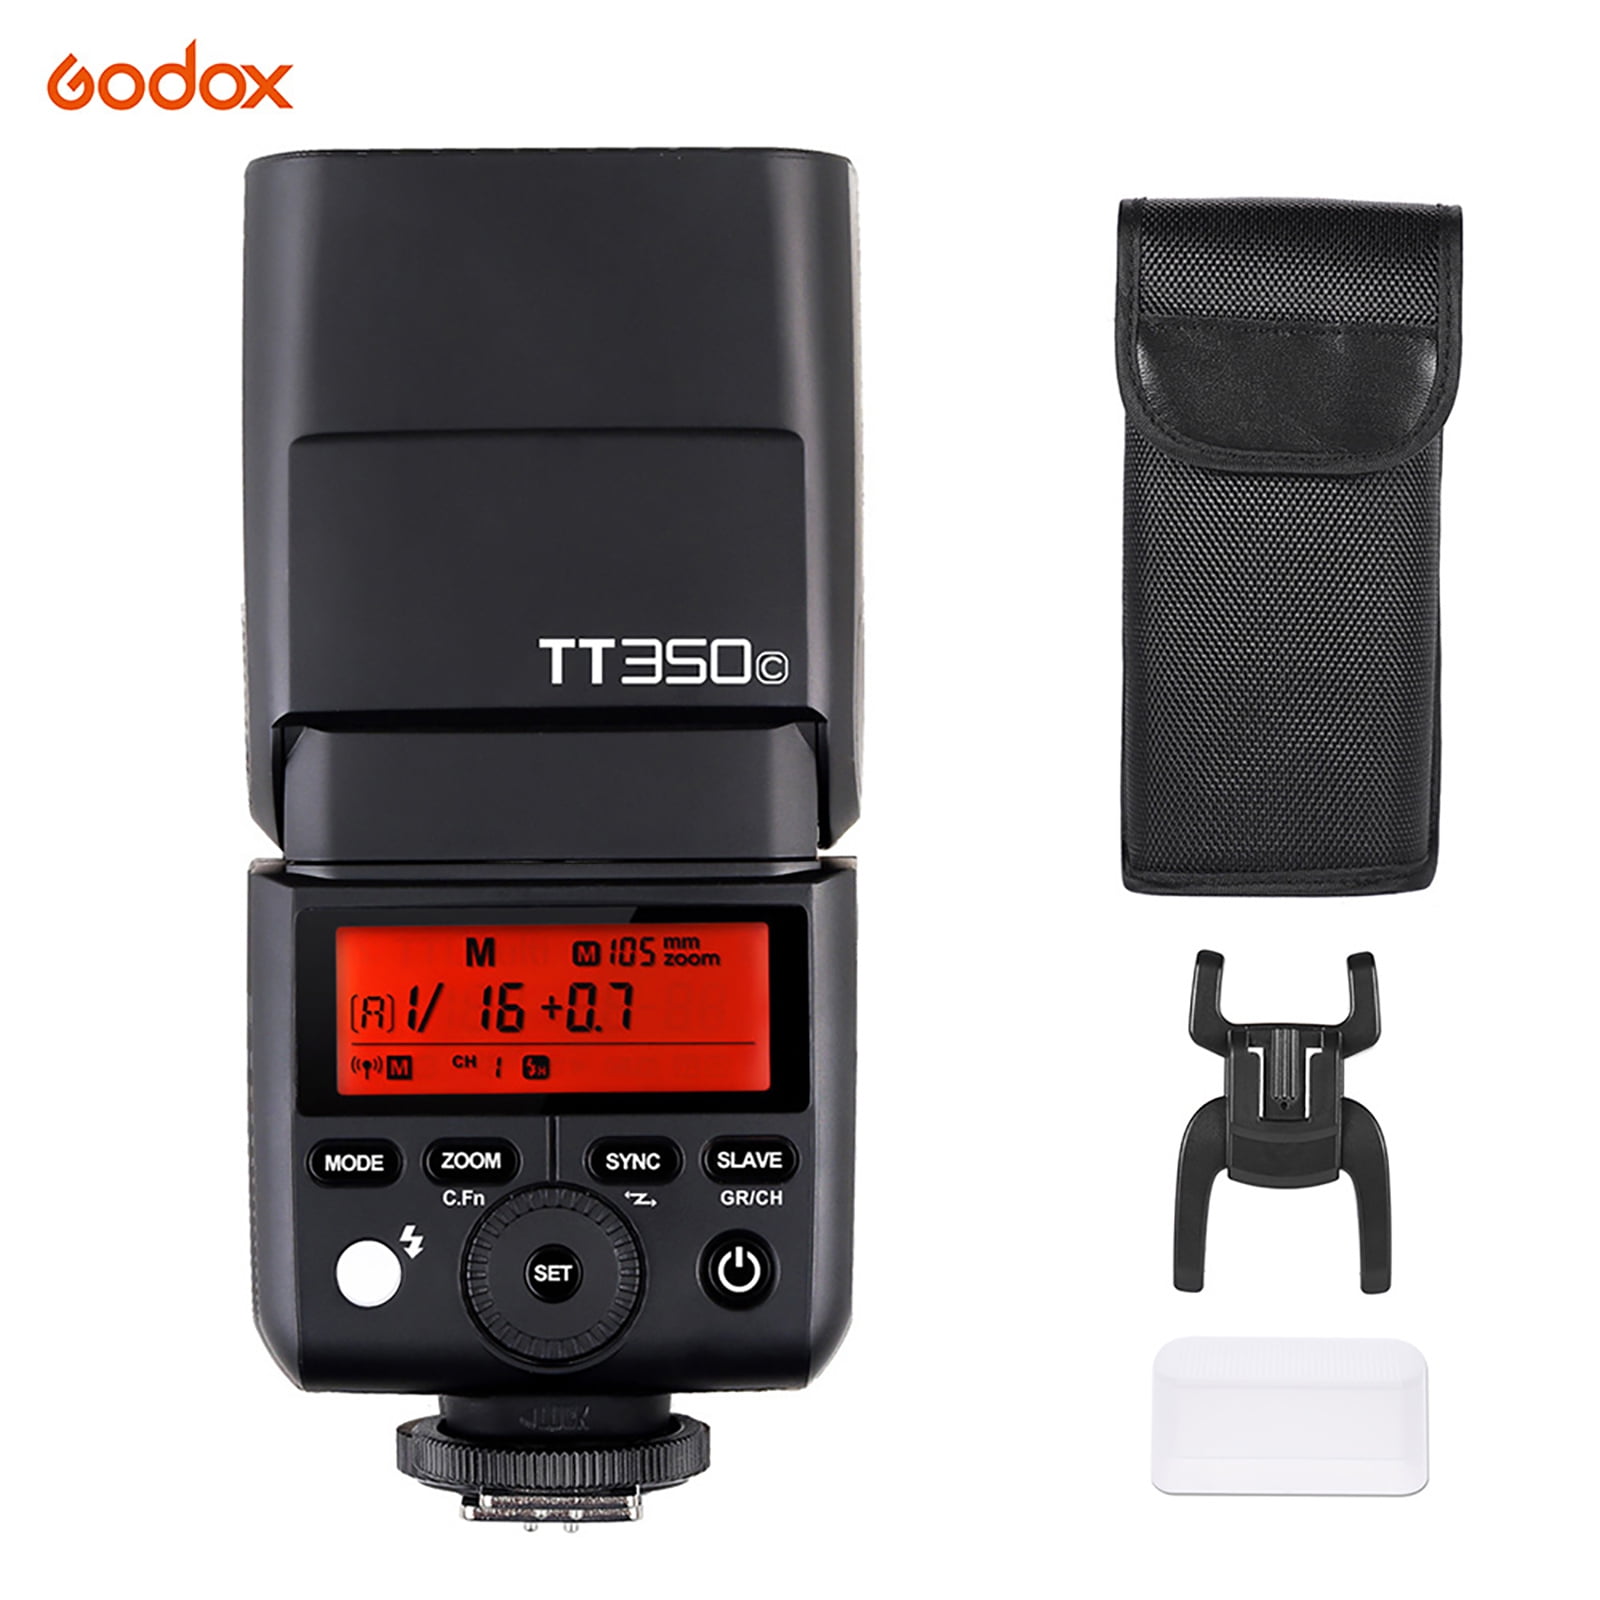 Godox V350 Series TTL 2.4G Li-Ion Camera Flash with Built-in Rechargeable Battery for Canon/Nikon/Sony/Olympus /Fujifilm 